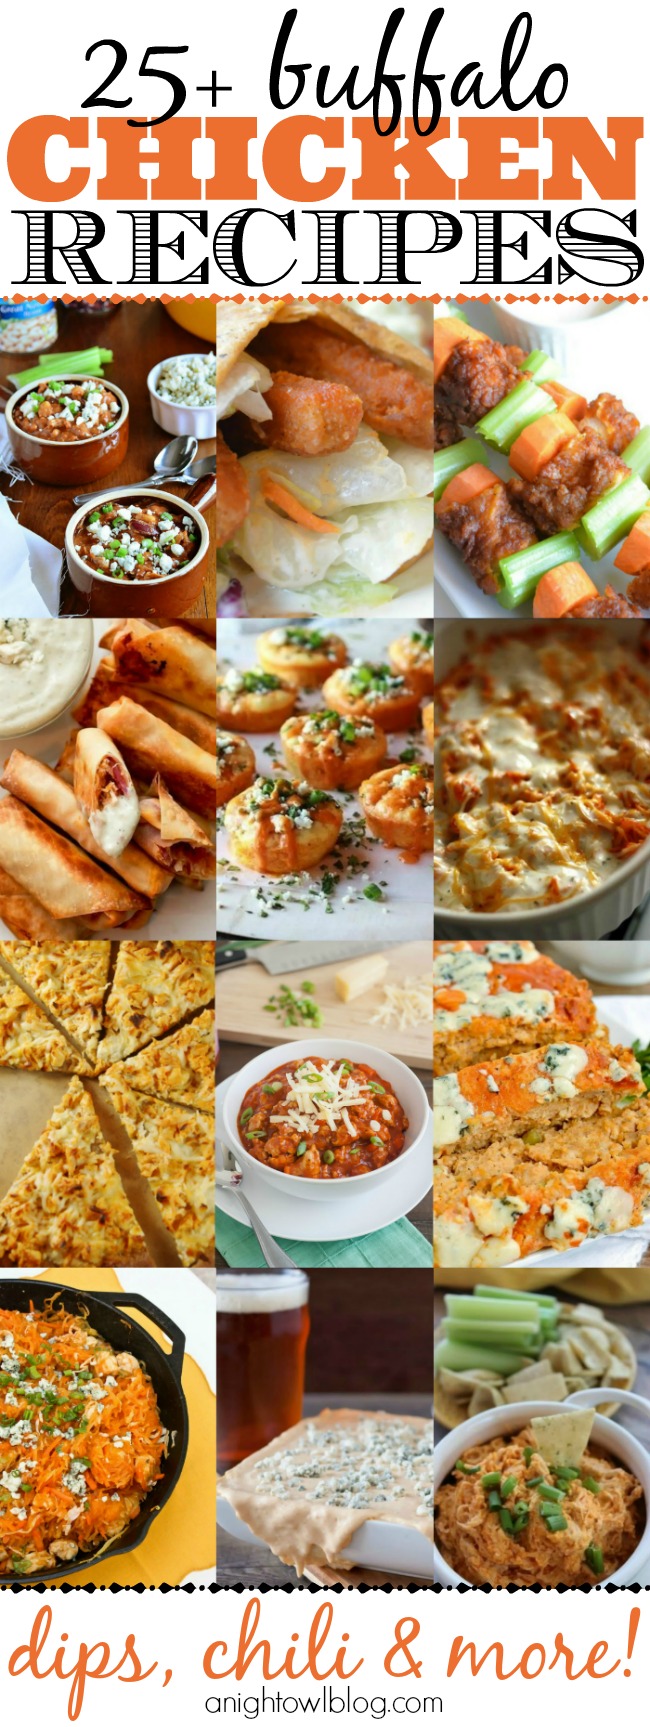 I want to try ALL of these amazing buffalo chicken recipes! Perfect for game day!